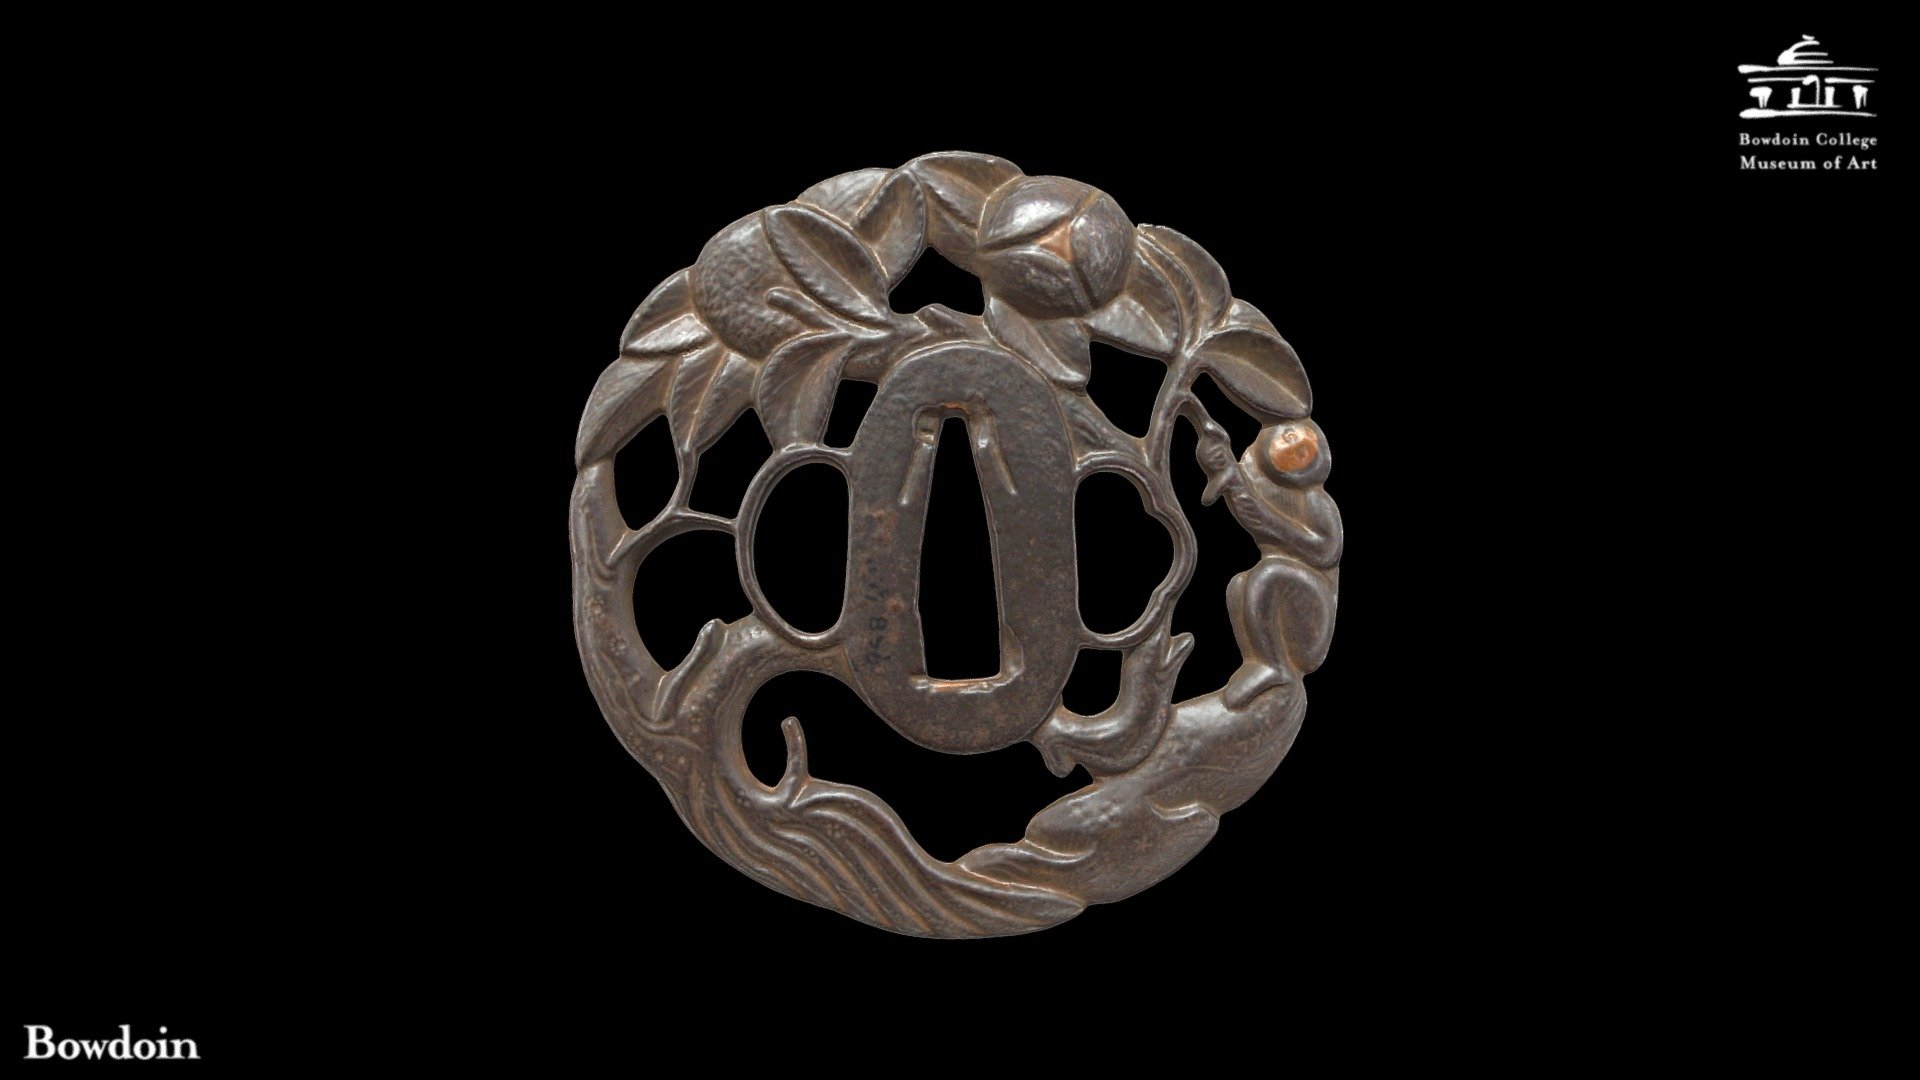 Artist Echizen Ju Kinai

Title Sword Guard (Tsuba): Monkey with Peaches

Creation Date 1603-1868

Century 17th-19th century

Dimensions 3 3/16 in. x 3 in. x 5/16 in. (8.1 cm x 7.62 cm x 0.79 cm)

Object Type arms and armor

Creation Place Asia, Japanese

Medium and Support iron

Gift of the Misses Harriet Sarah and Mary Sophia Walker

Accession Number 1894.92 
https://artmuseum.bowdoin.edu/objects-1/info/395

Model by D. Israel using Artec Space Spider Scanner - Sword Guard (Tsuba): Monkey with Peaches - 3D model by Bowdoin College Museum of Art (@bowdoin-college-museum-of-art) 3d model